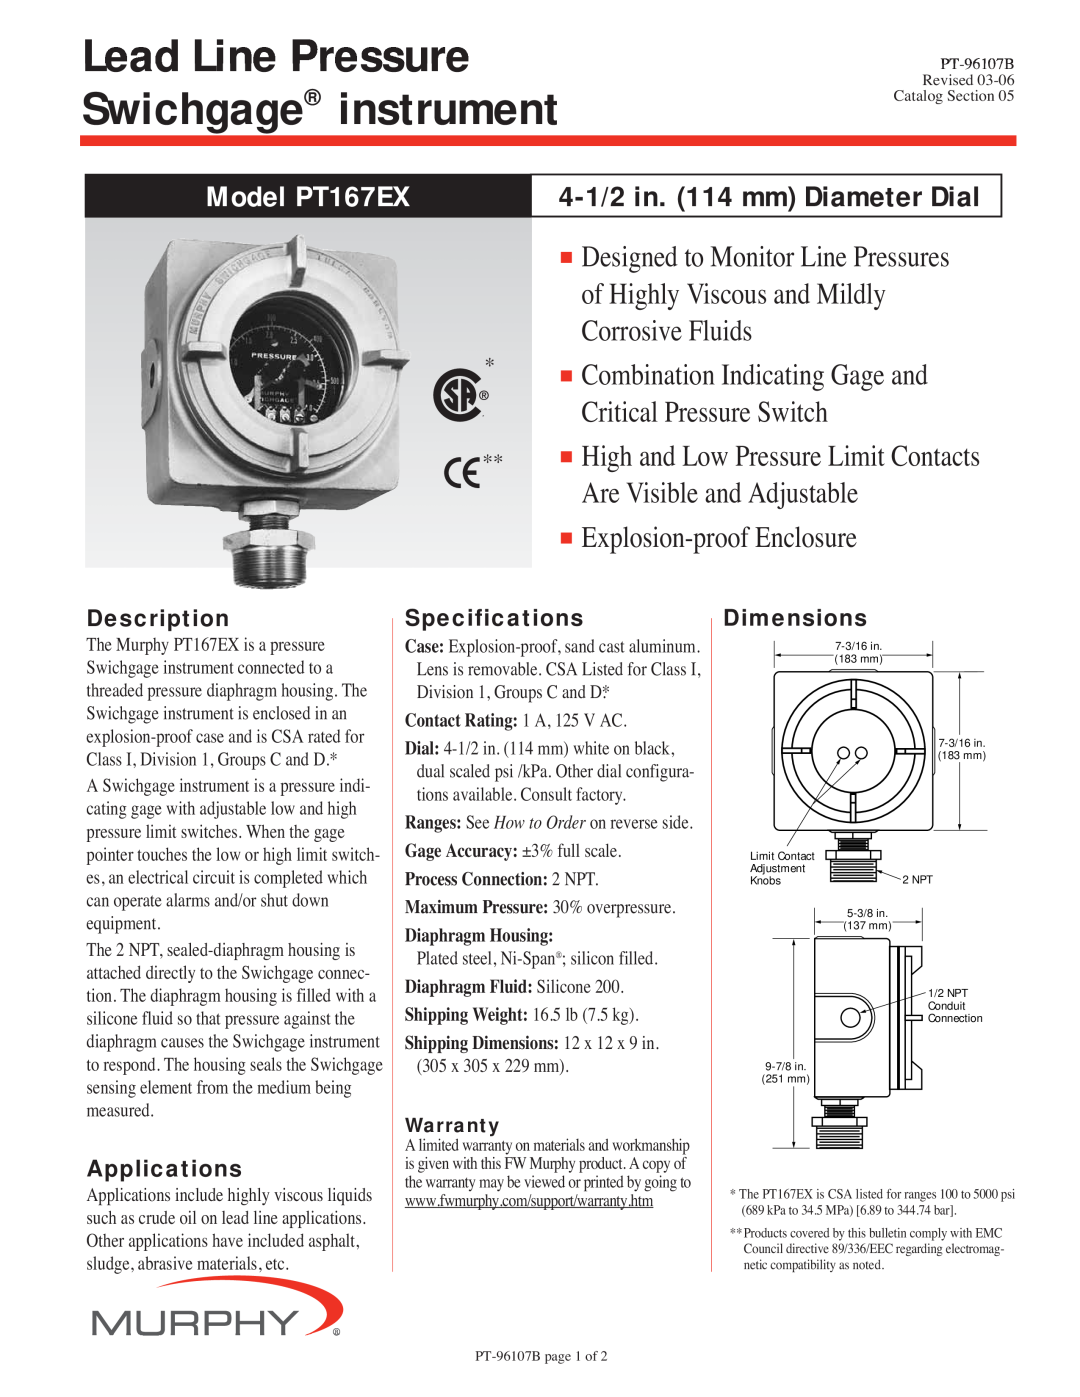 Murphy PT167EX specifications Description, Specifications, Dimensions, Applications, Class I, Division 1, Groups C and D 